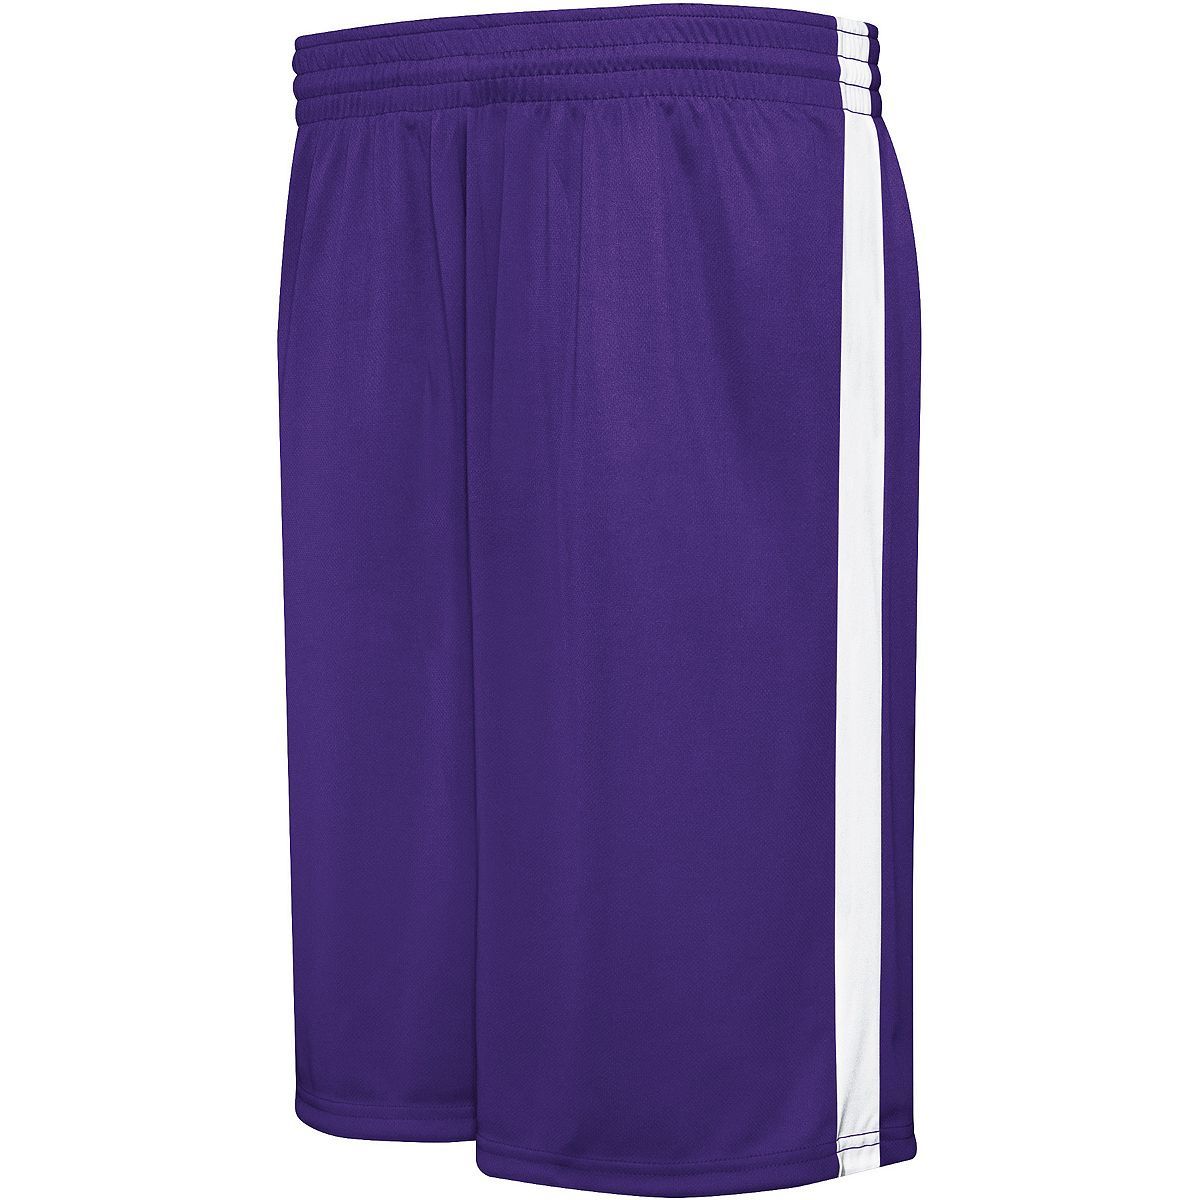 Augusta Sportswear Competition Reversible Shorts in Purple/White  -Part of the Adult, Adult-Shorts, Augusta-Products, Basketball, All-Sports, All-Sports-1 product lines at KanaleyCreations.com